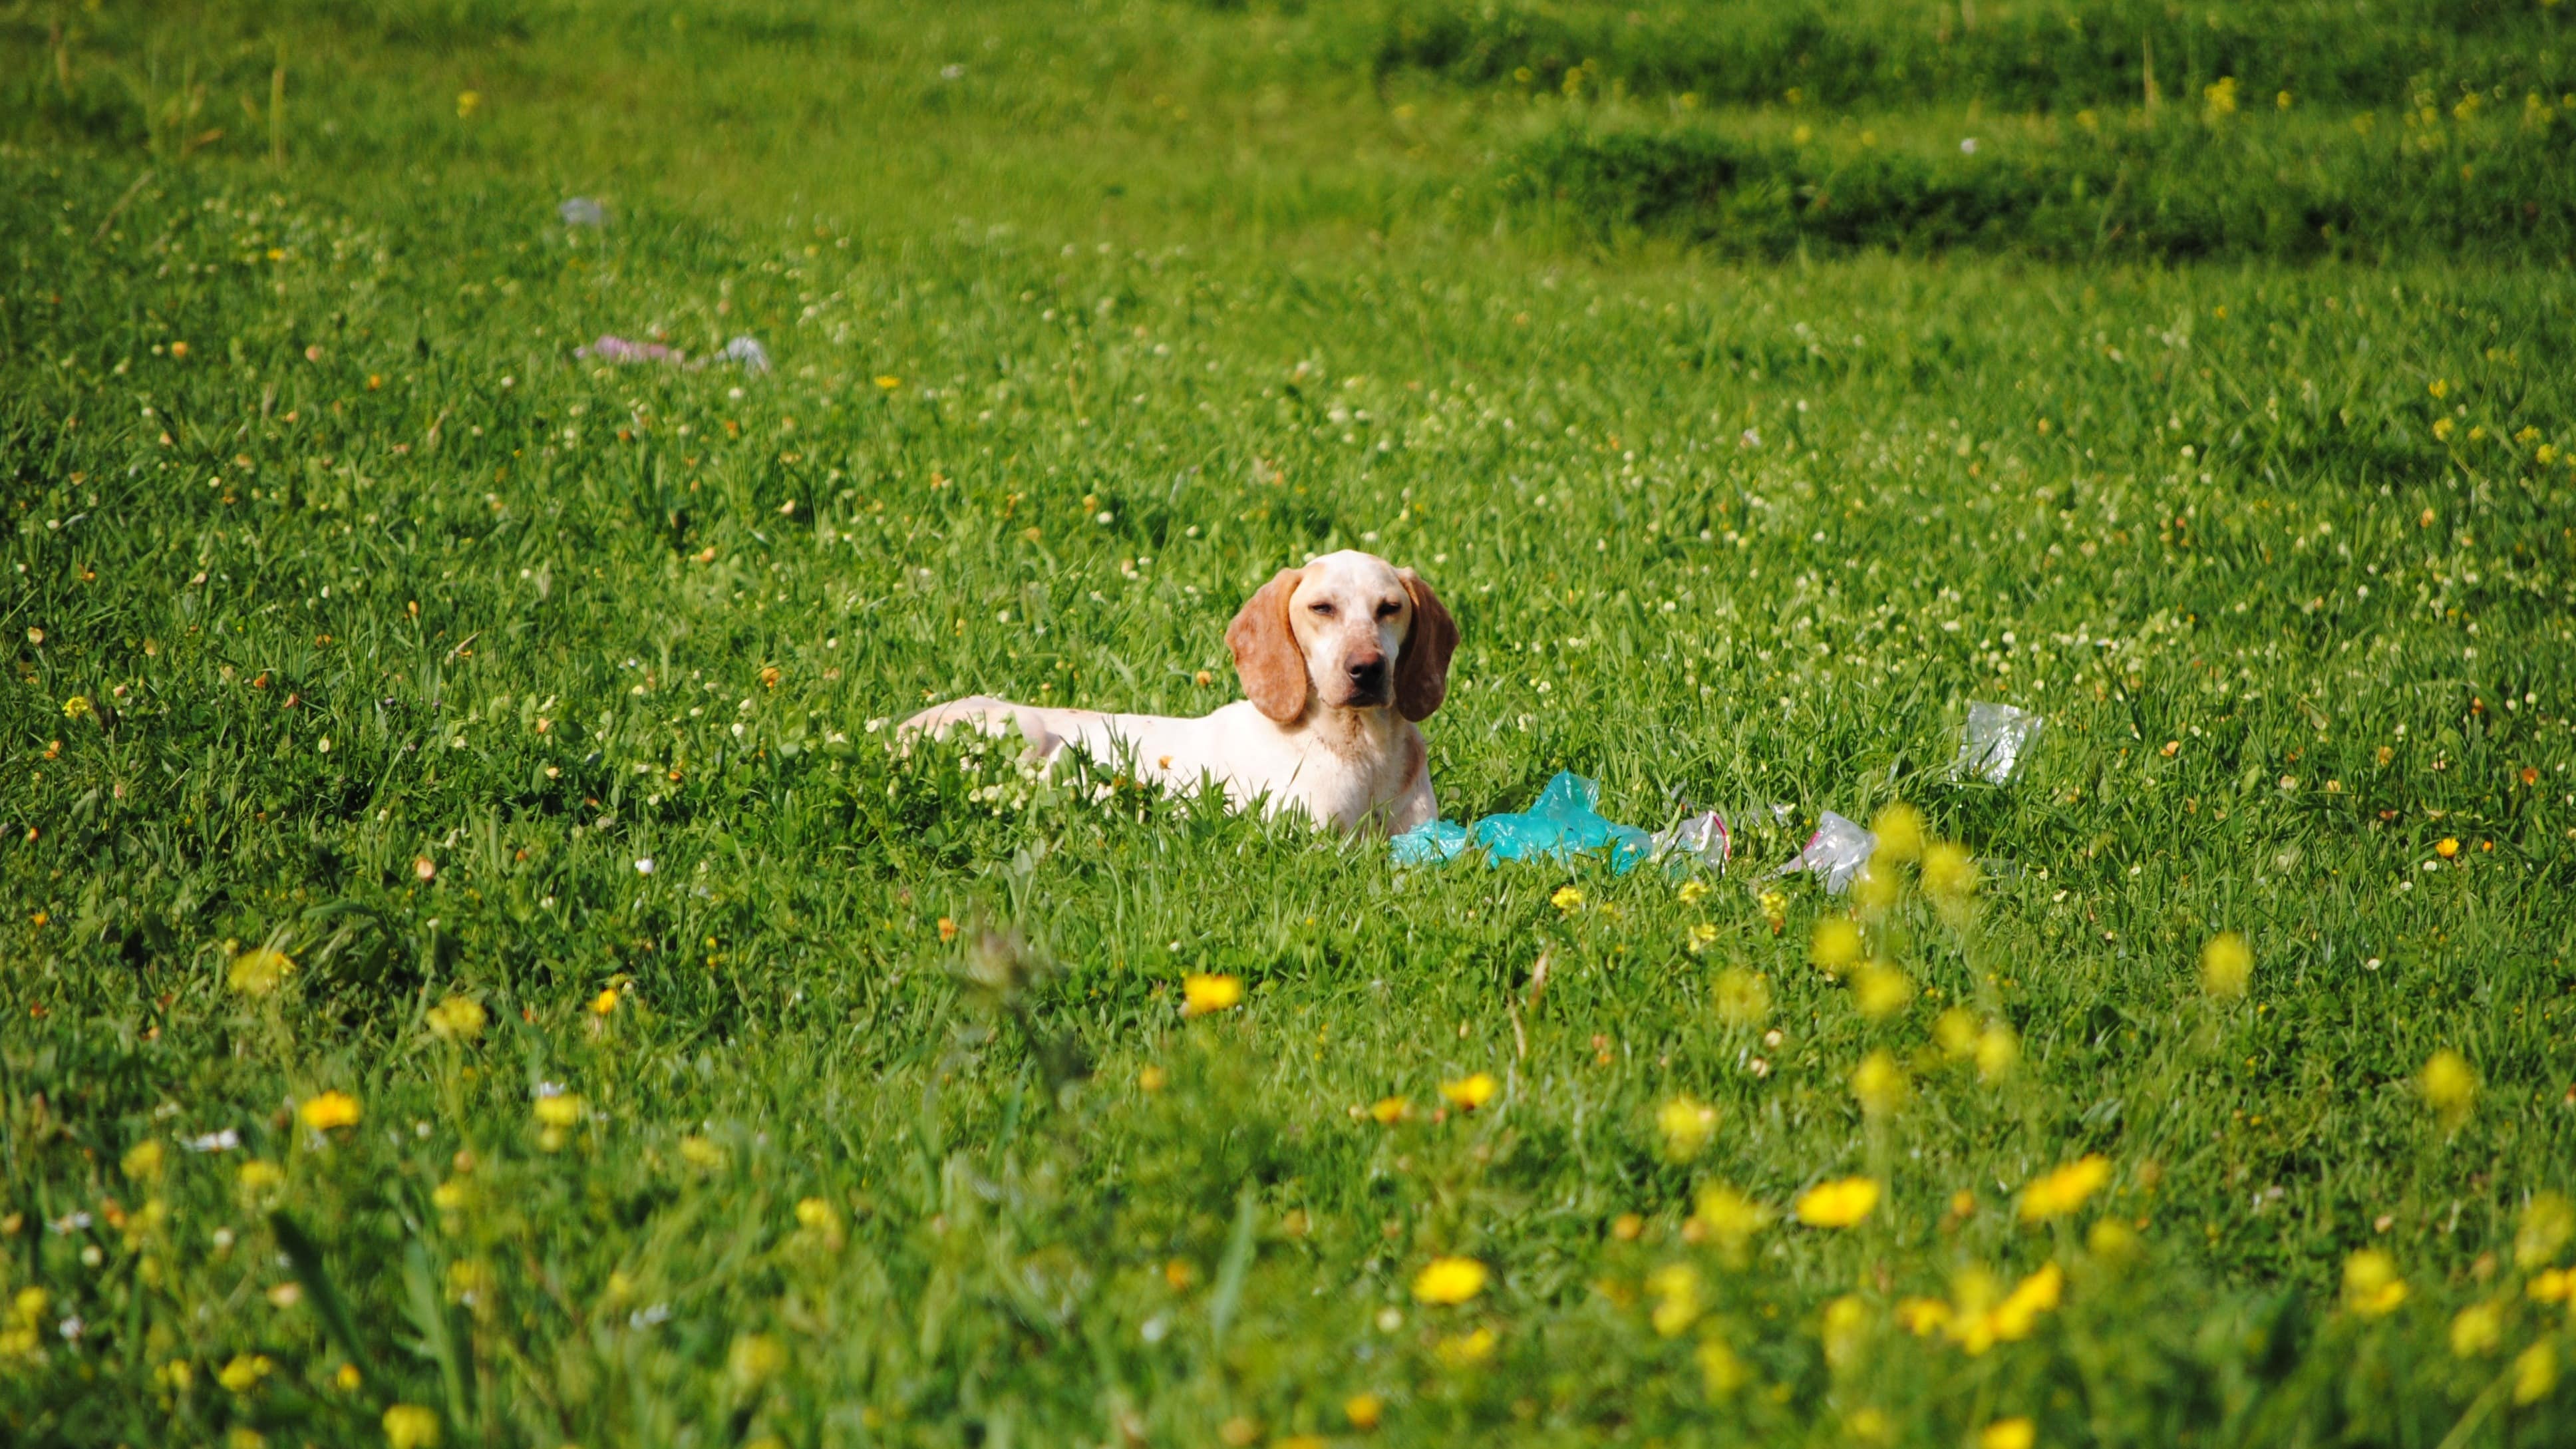 Make it an adventure to luxury dog-friendly cottages